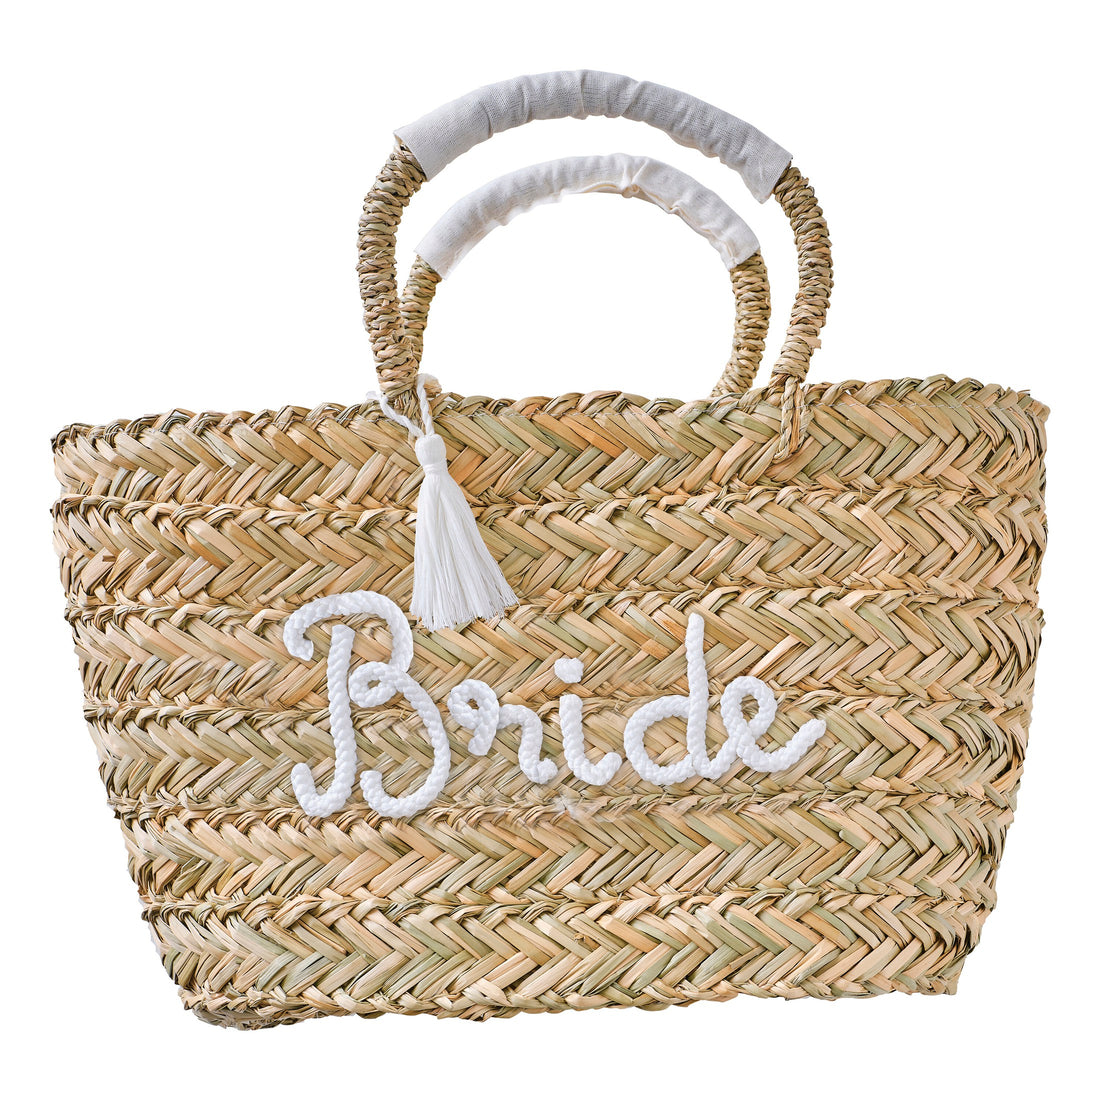 Woven Rattan Bride Bag with Tassels